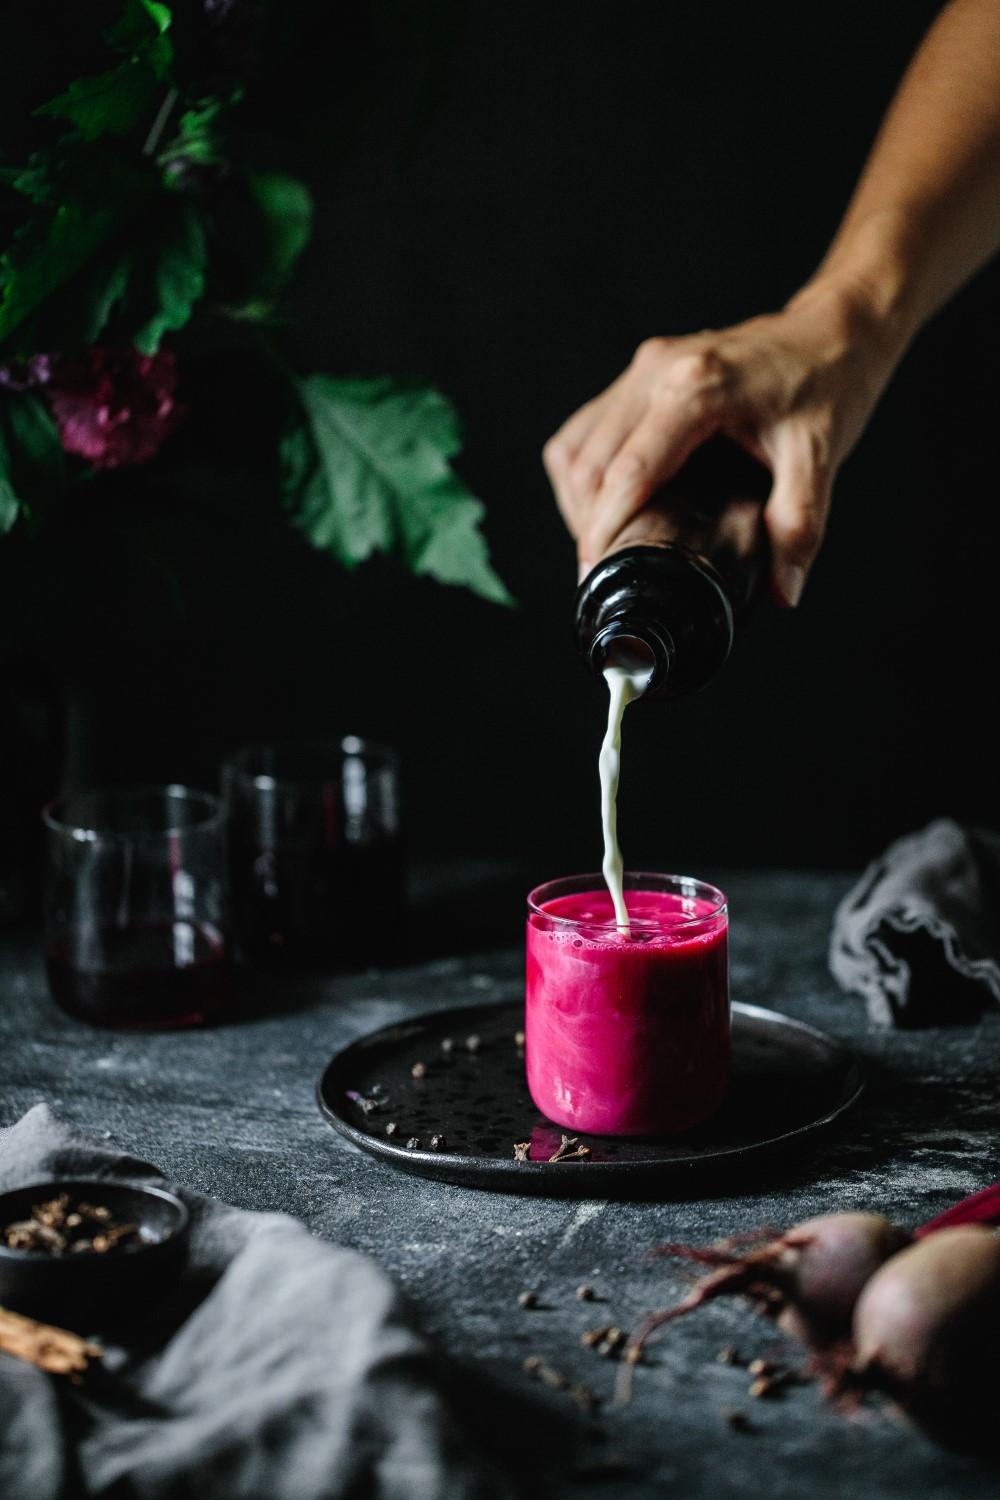 Taking great food photos in low light can be really frustrating, but it doesn't need to be. With these five tips, you'll be able to shoot in a very dark room and still create beautiful images.